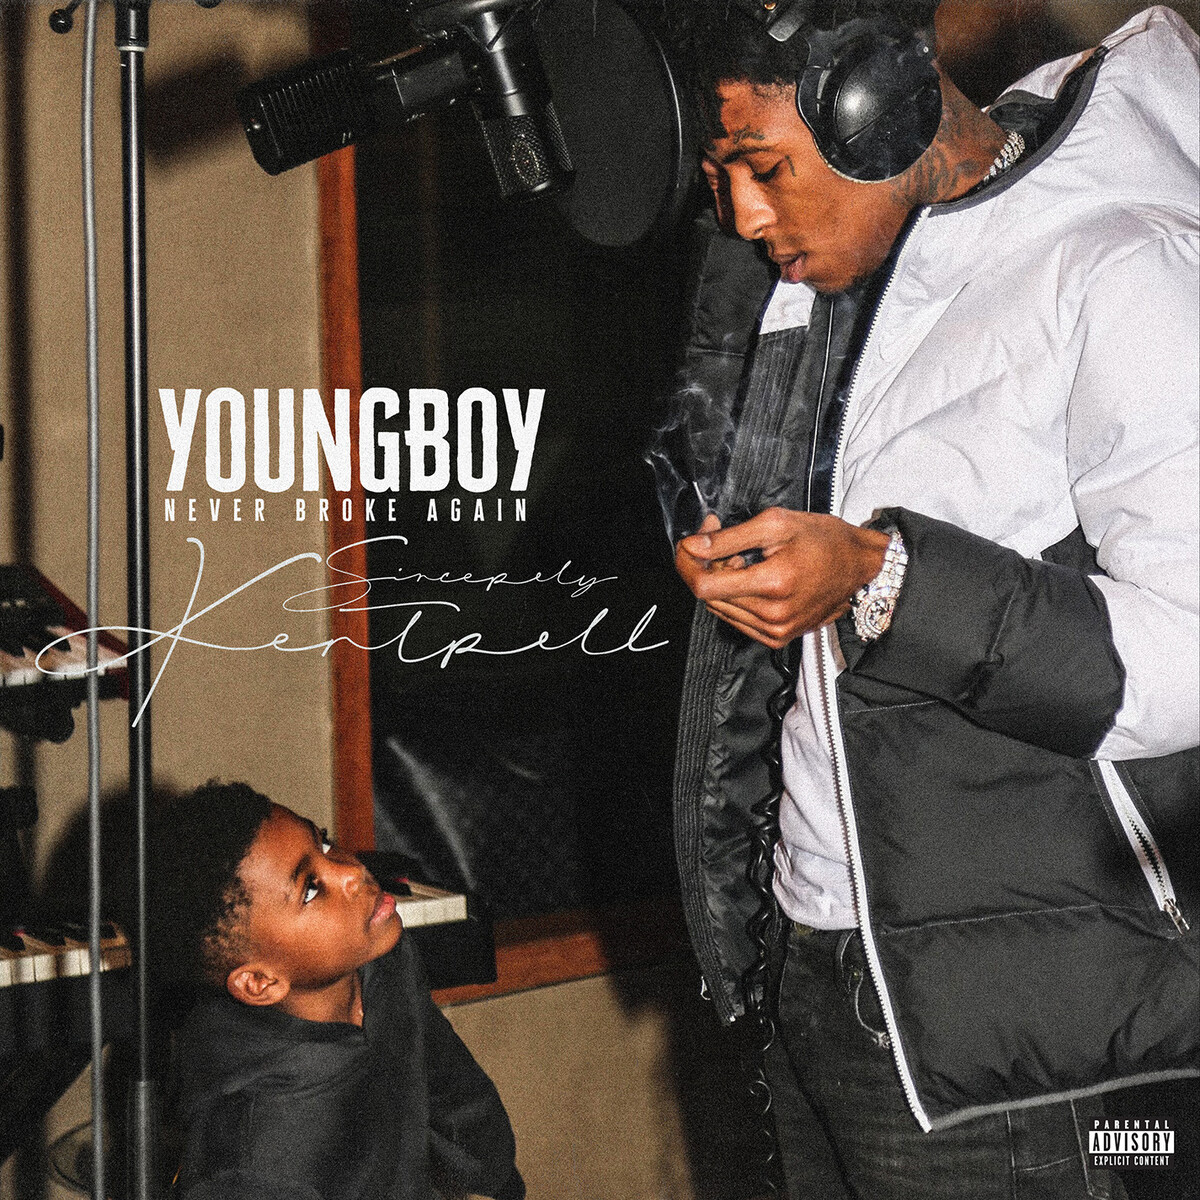 YoungBoy Never Broke Again Albums: songs, discography, biography, and listening guide Your Music